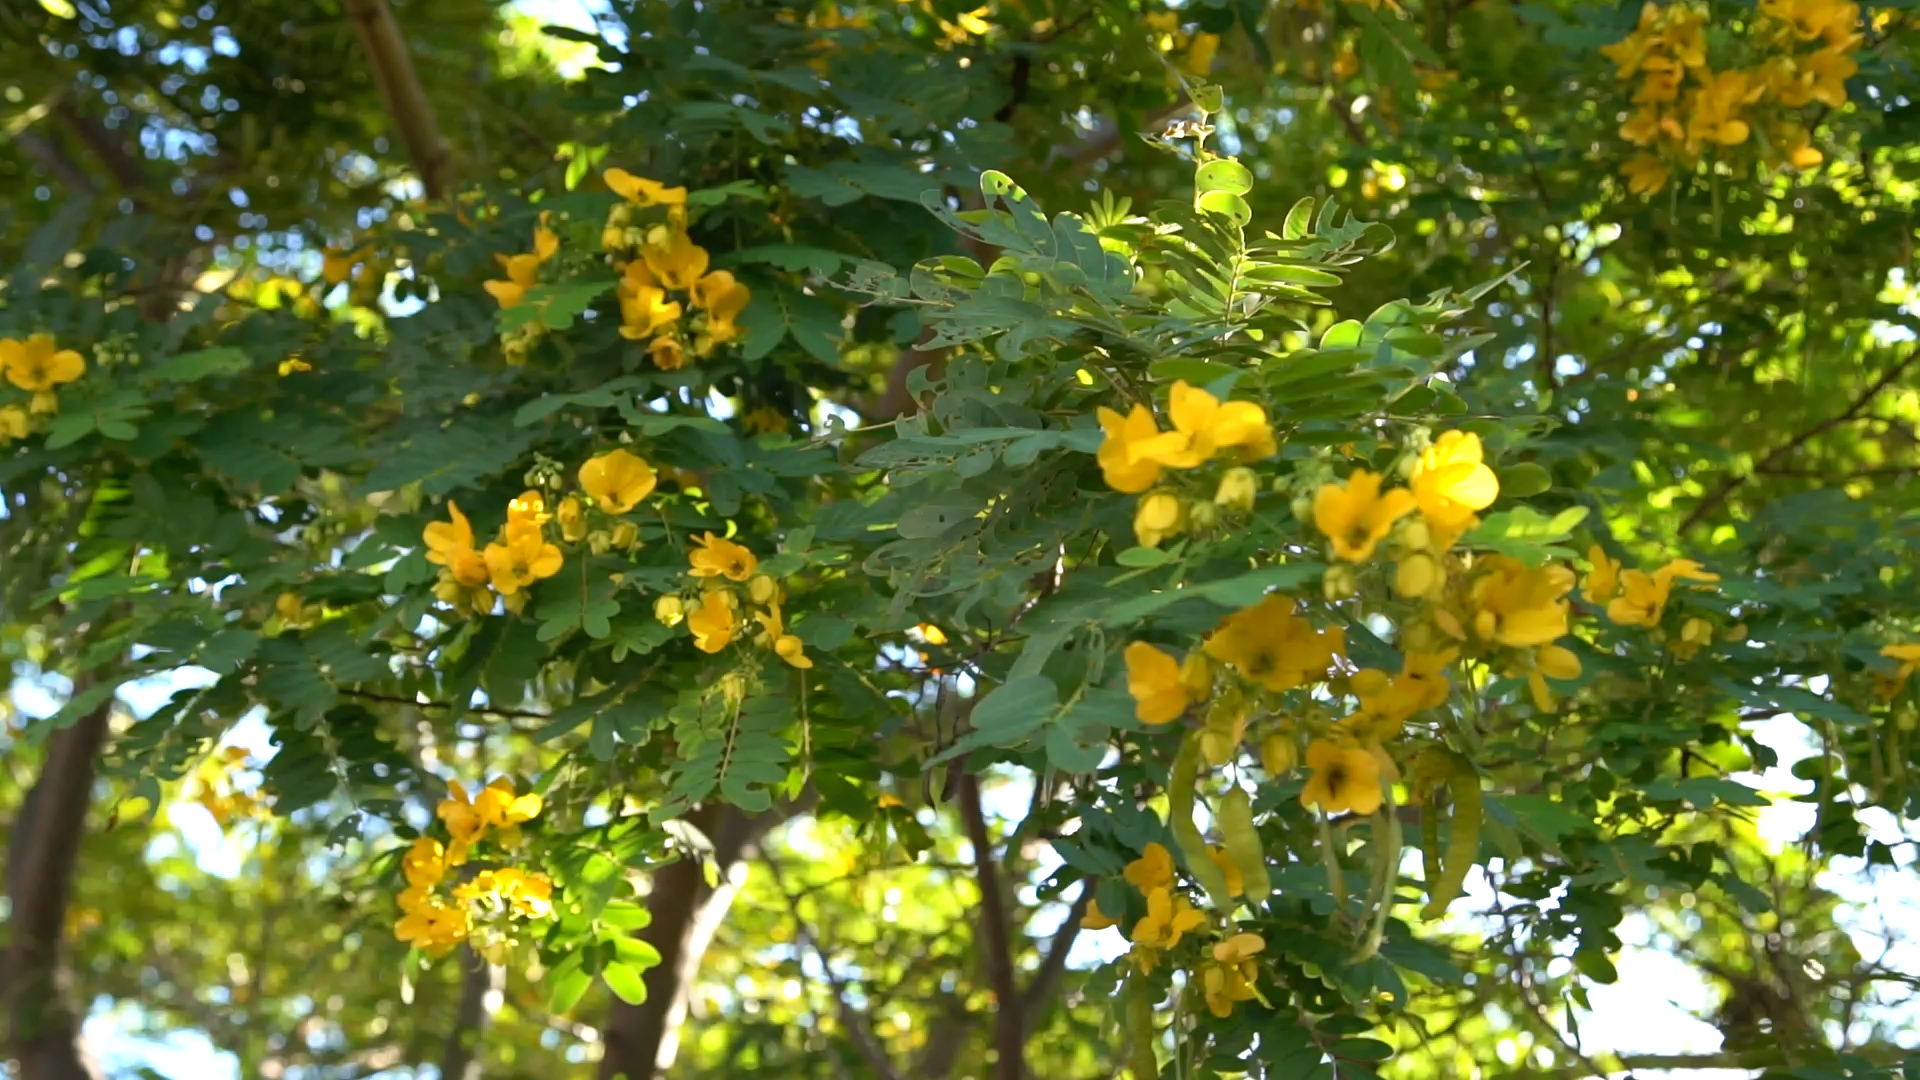 A tree with yellow blossoms.